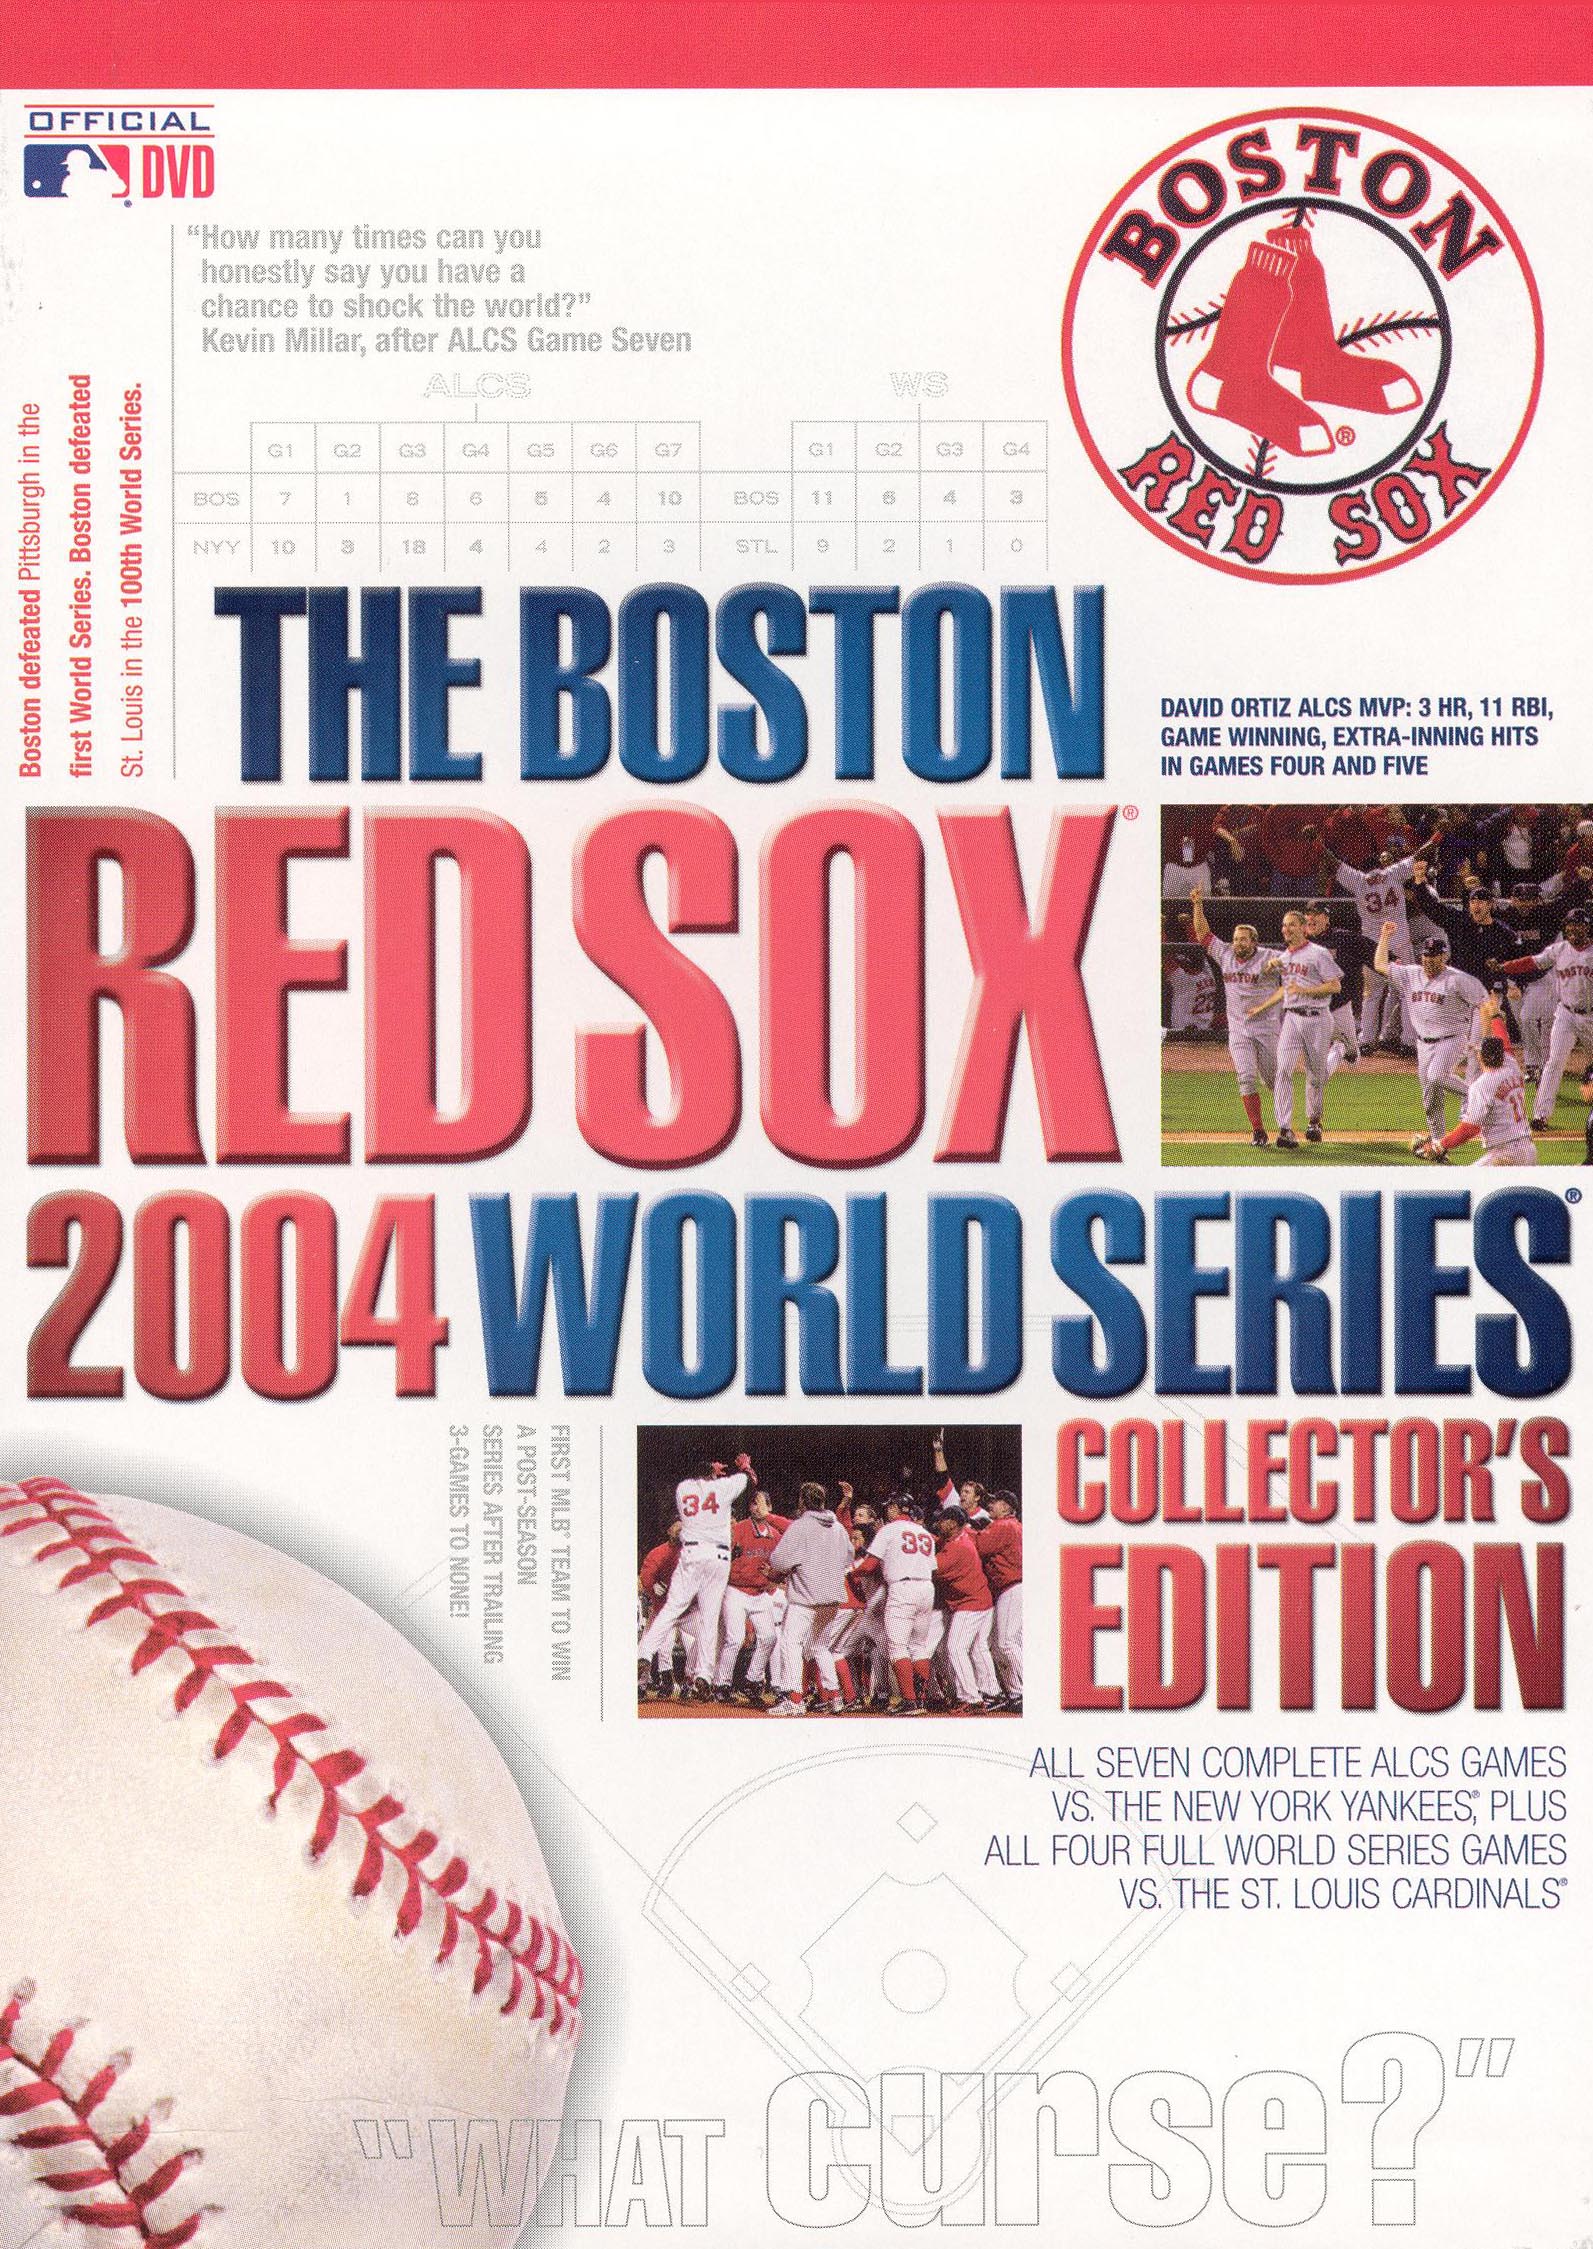 Best Buy: MLB: Fall Classic at Fenway Park 2004 and 2007 World Series Films  [DVD]